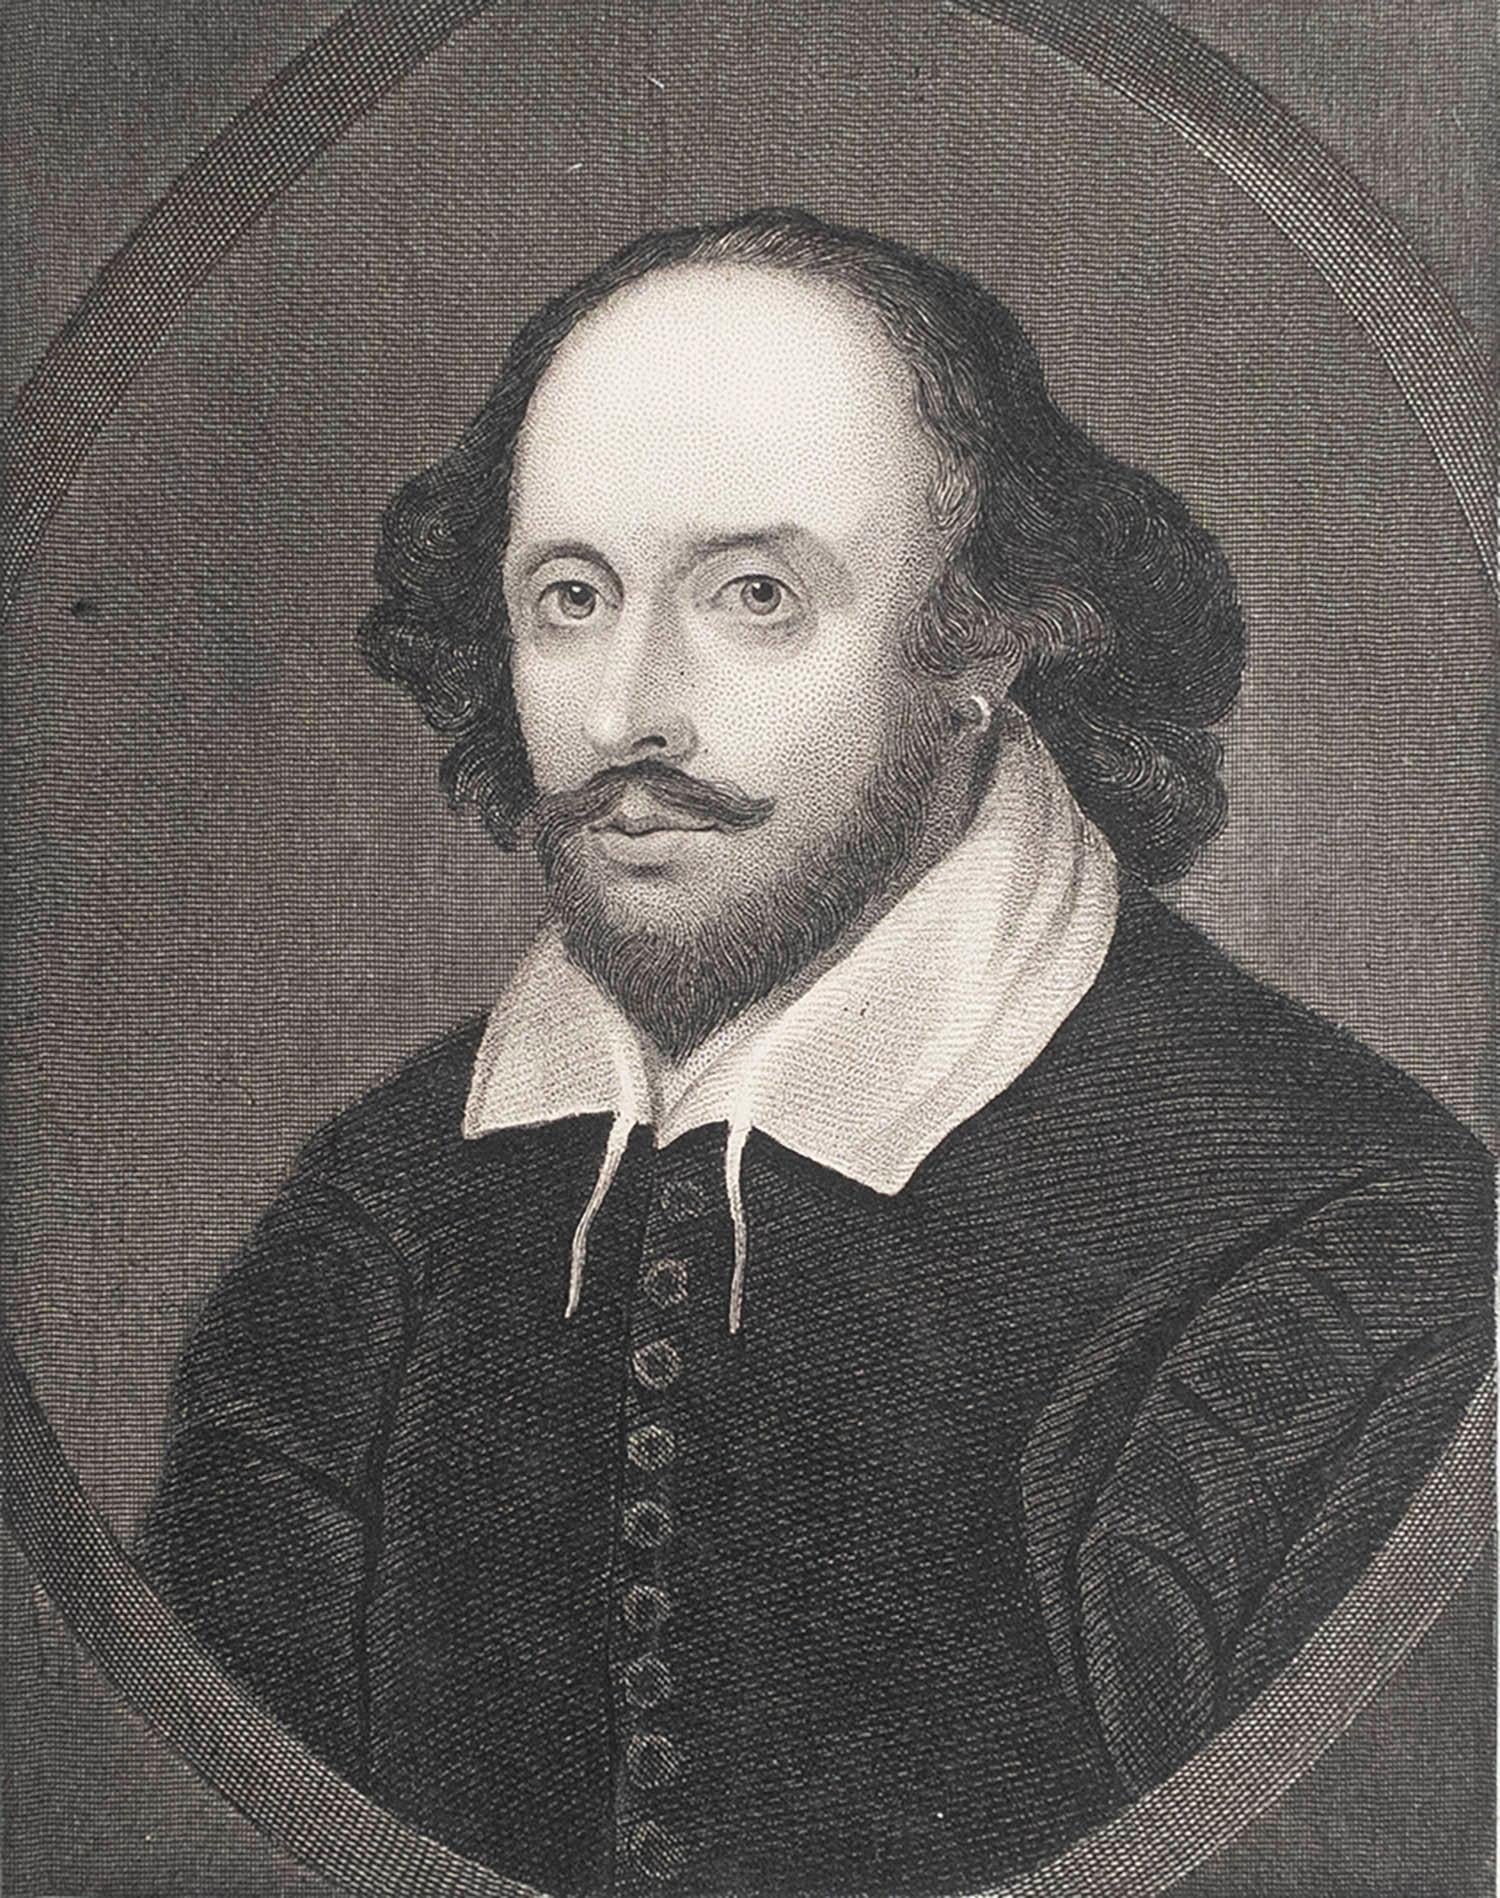 Great image of William Shakespeare

Fine steel engraving 

With a facsimile signature

Published C.1850

Unframed.